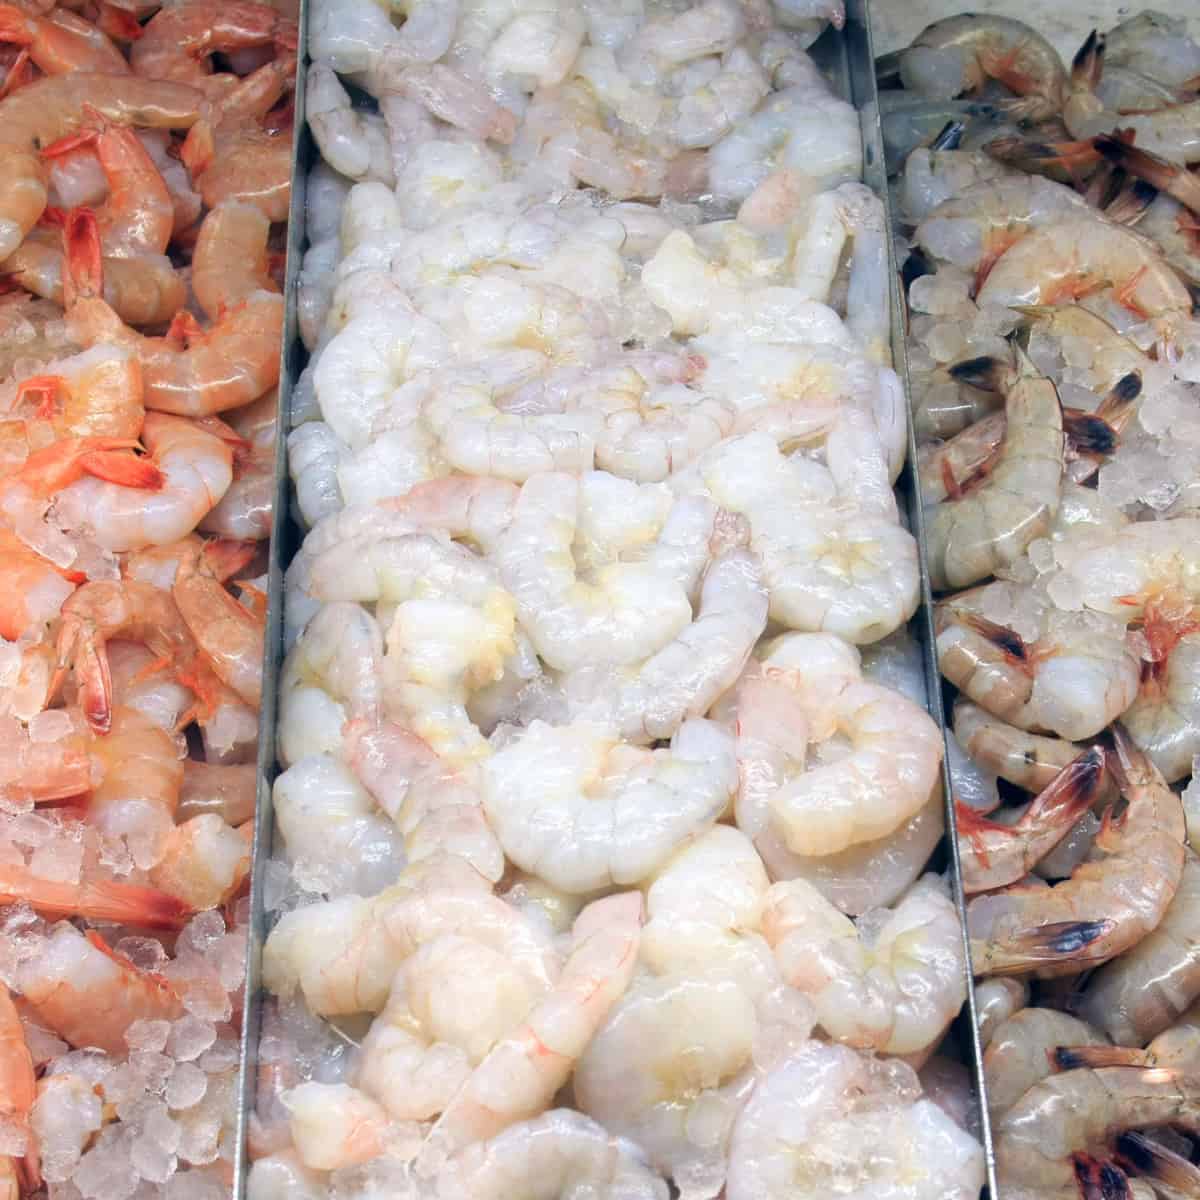 three different types of shrimp, on ice, at a market